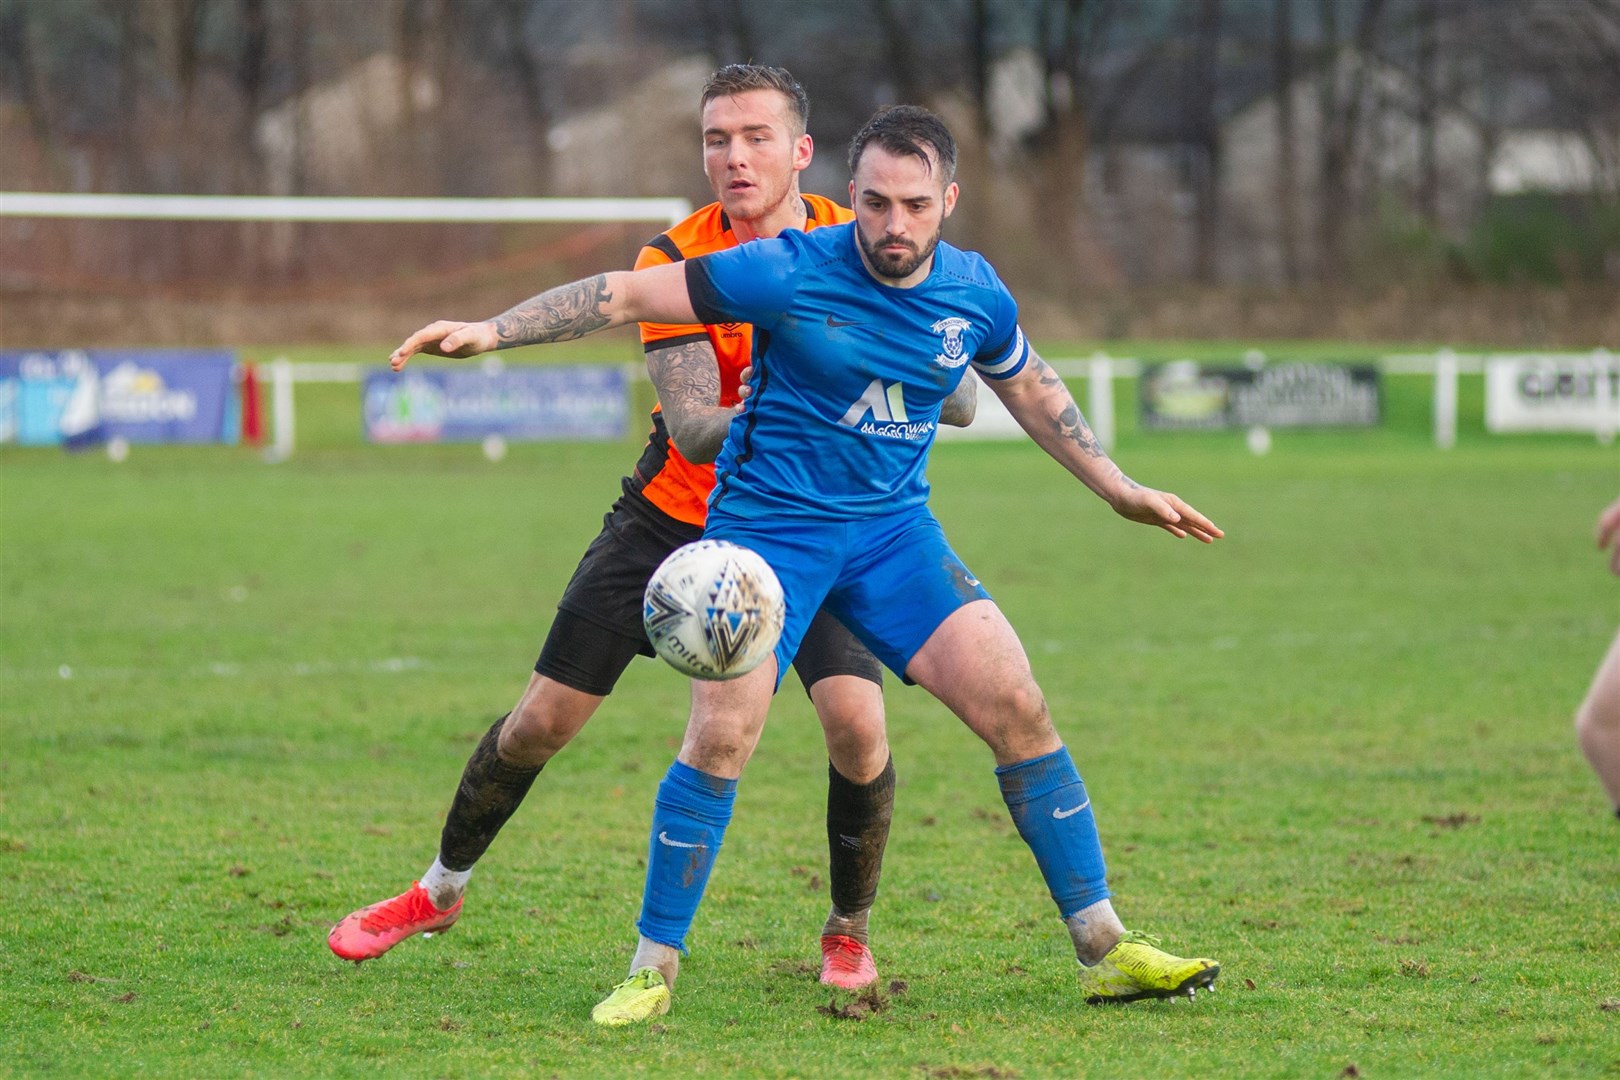 Rothes' Darryl McHardy and Strathspey's James Fraser compete for the ball. ..Rothes FC (3) vs Strathspey Thistle (2) - Highland Football League 01/02/2020 - MacKessack Park, Rothes...Picture: Daniel Forsyth..